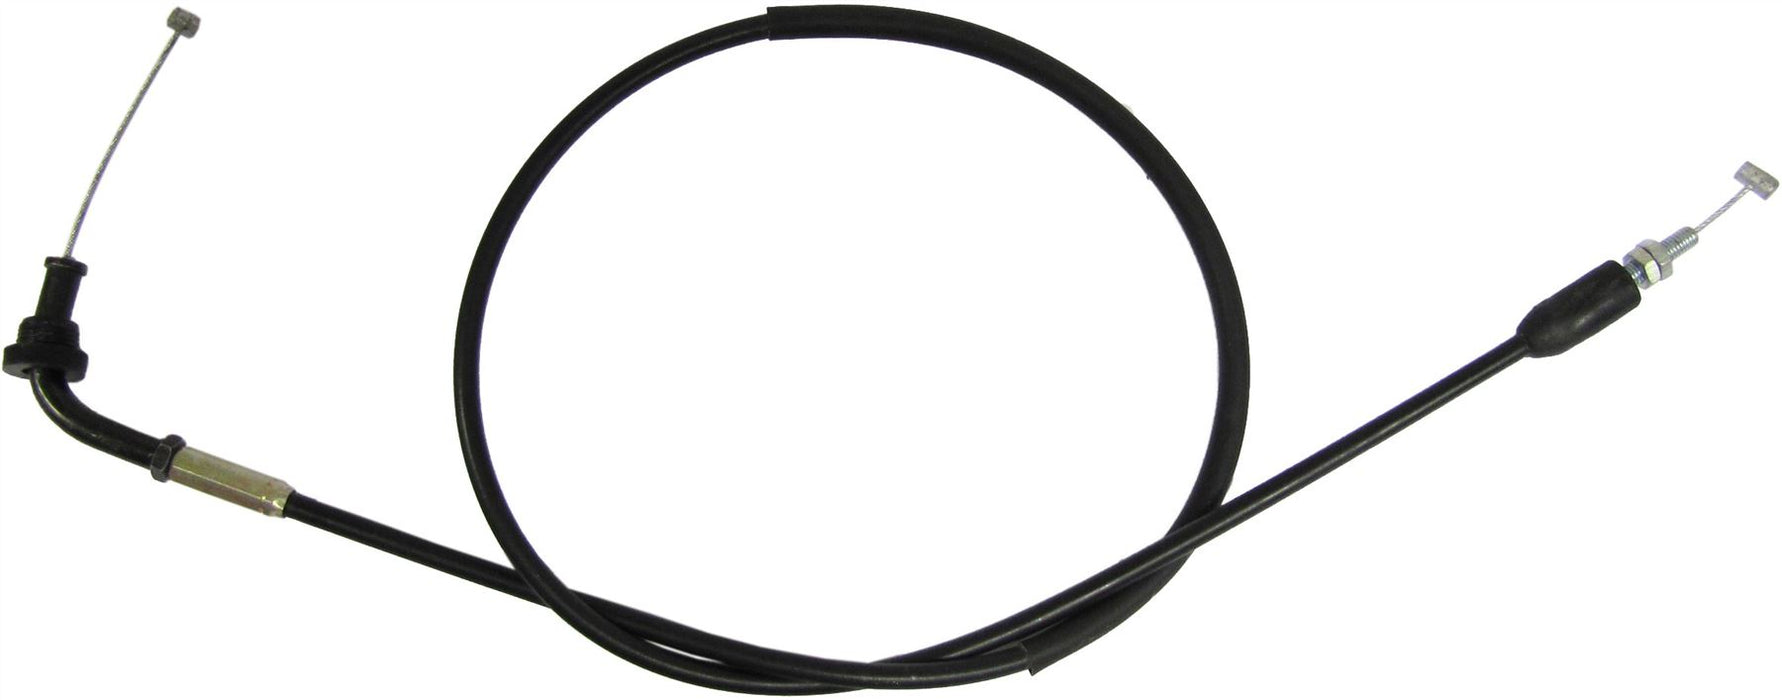 Pull Throttle Cable Fits Suzuki GS 1100 1982